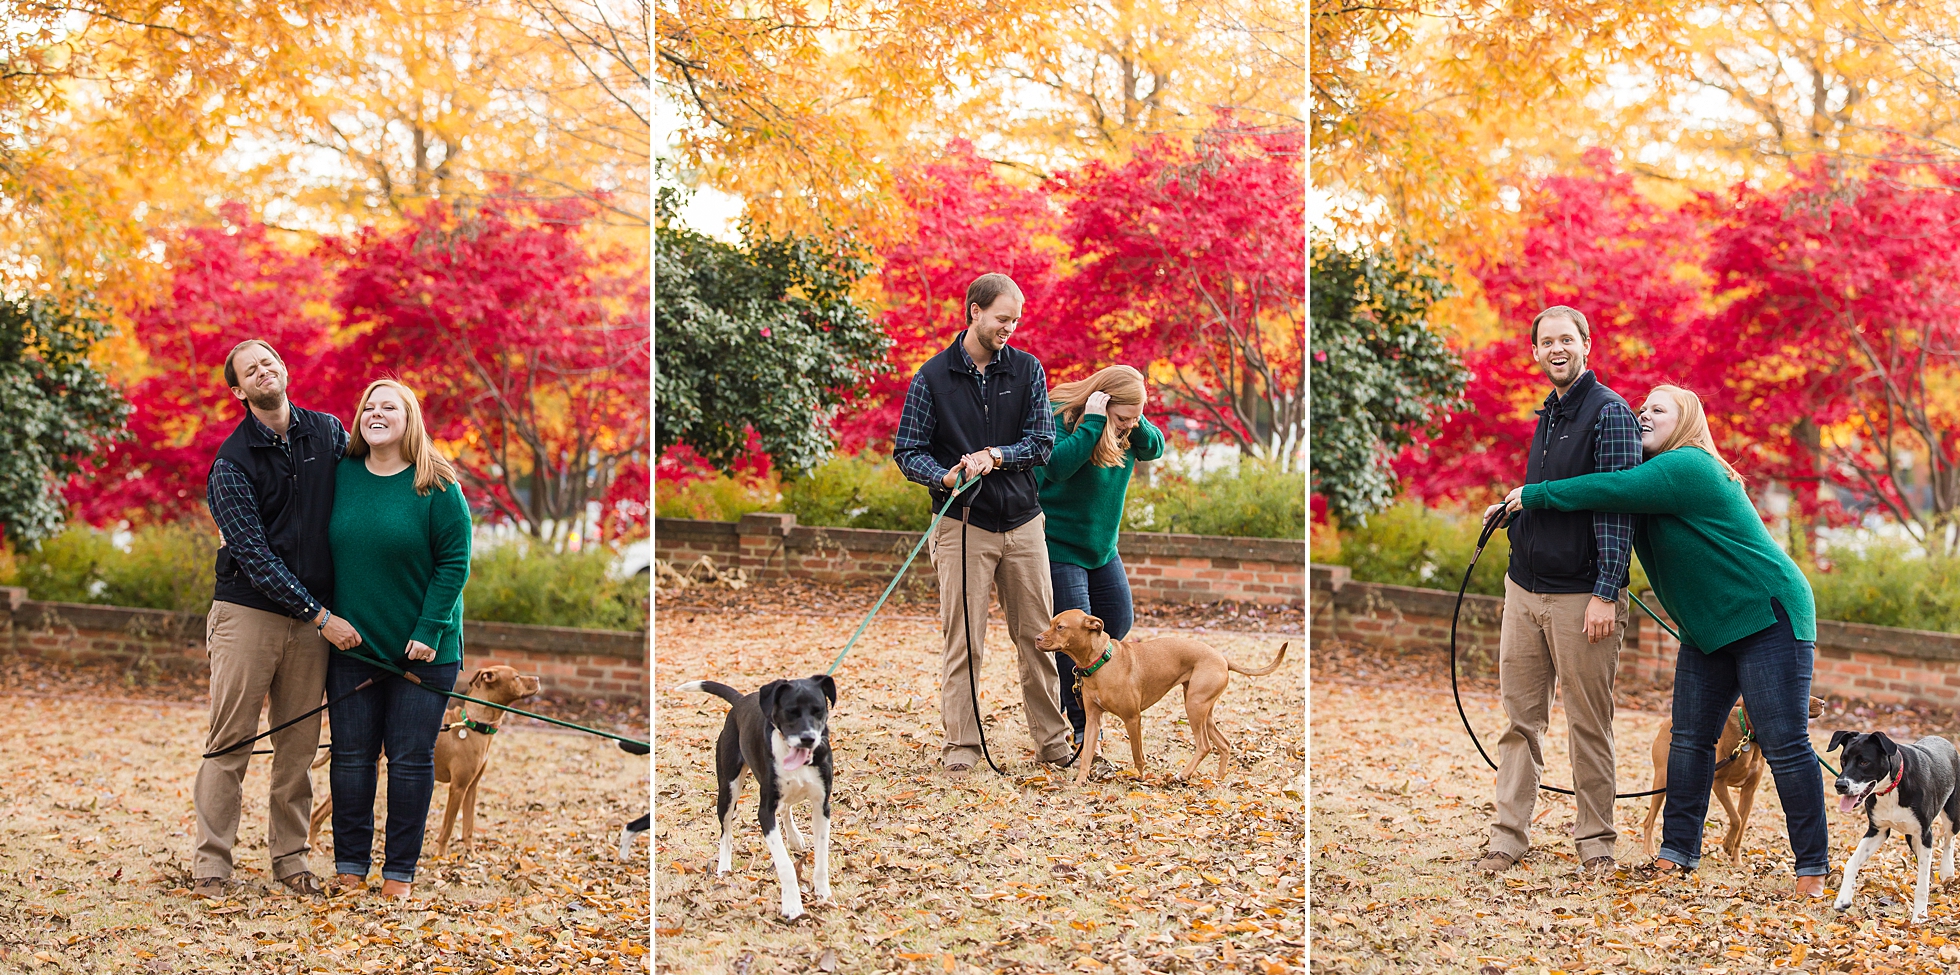 bloopers outtakes dog photos